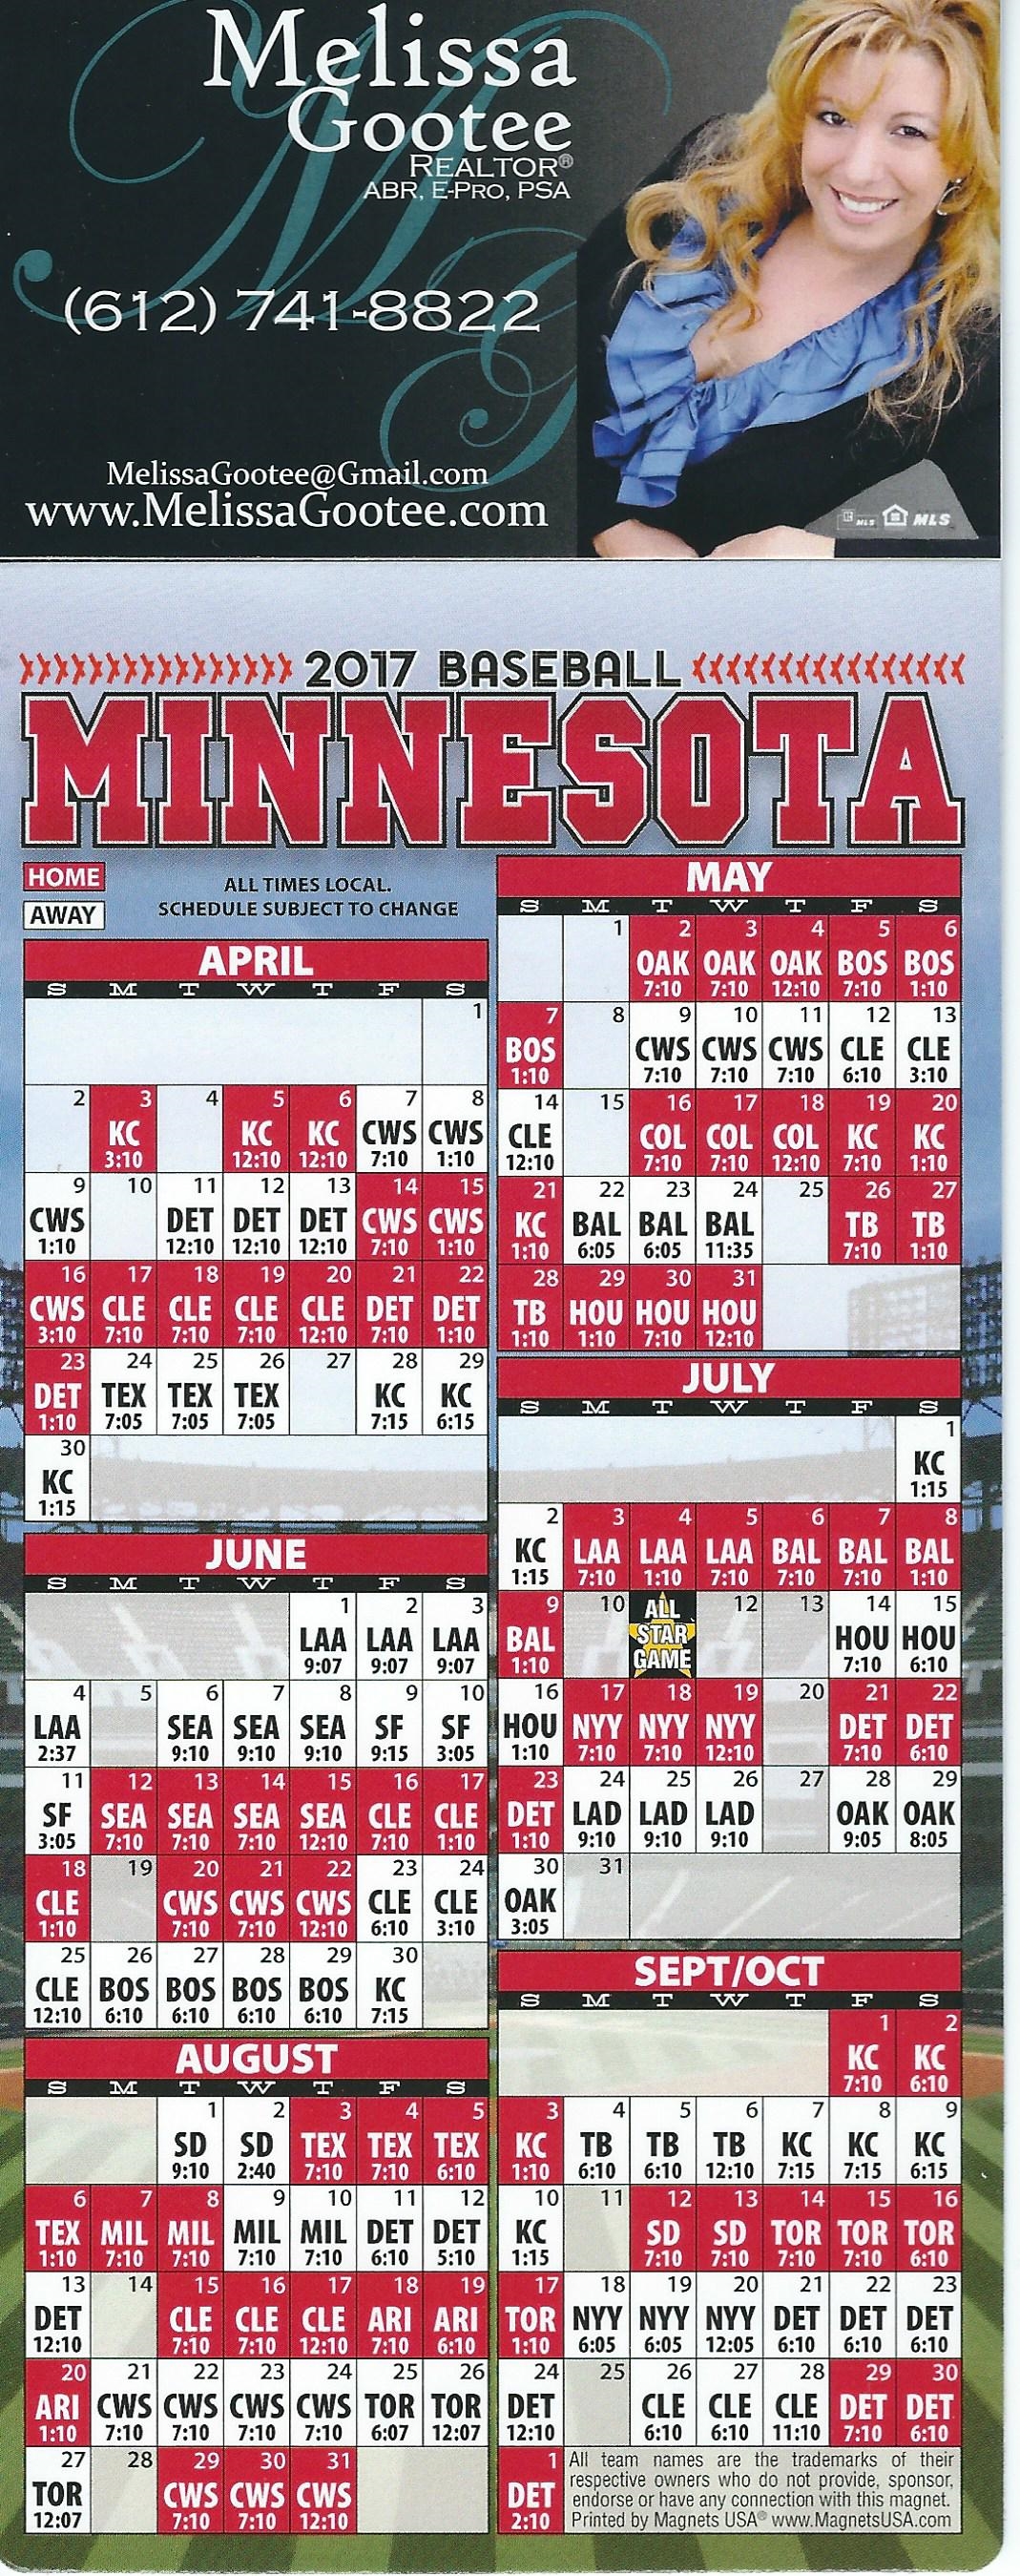 Your 2017 Twins Schedule